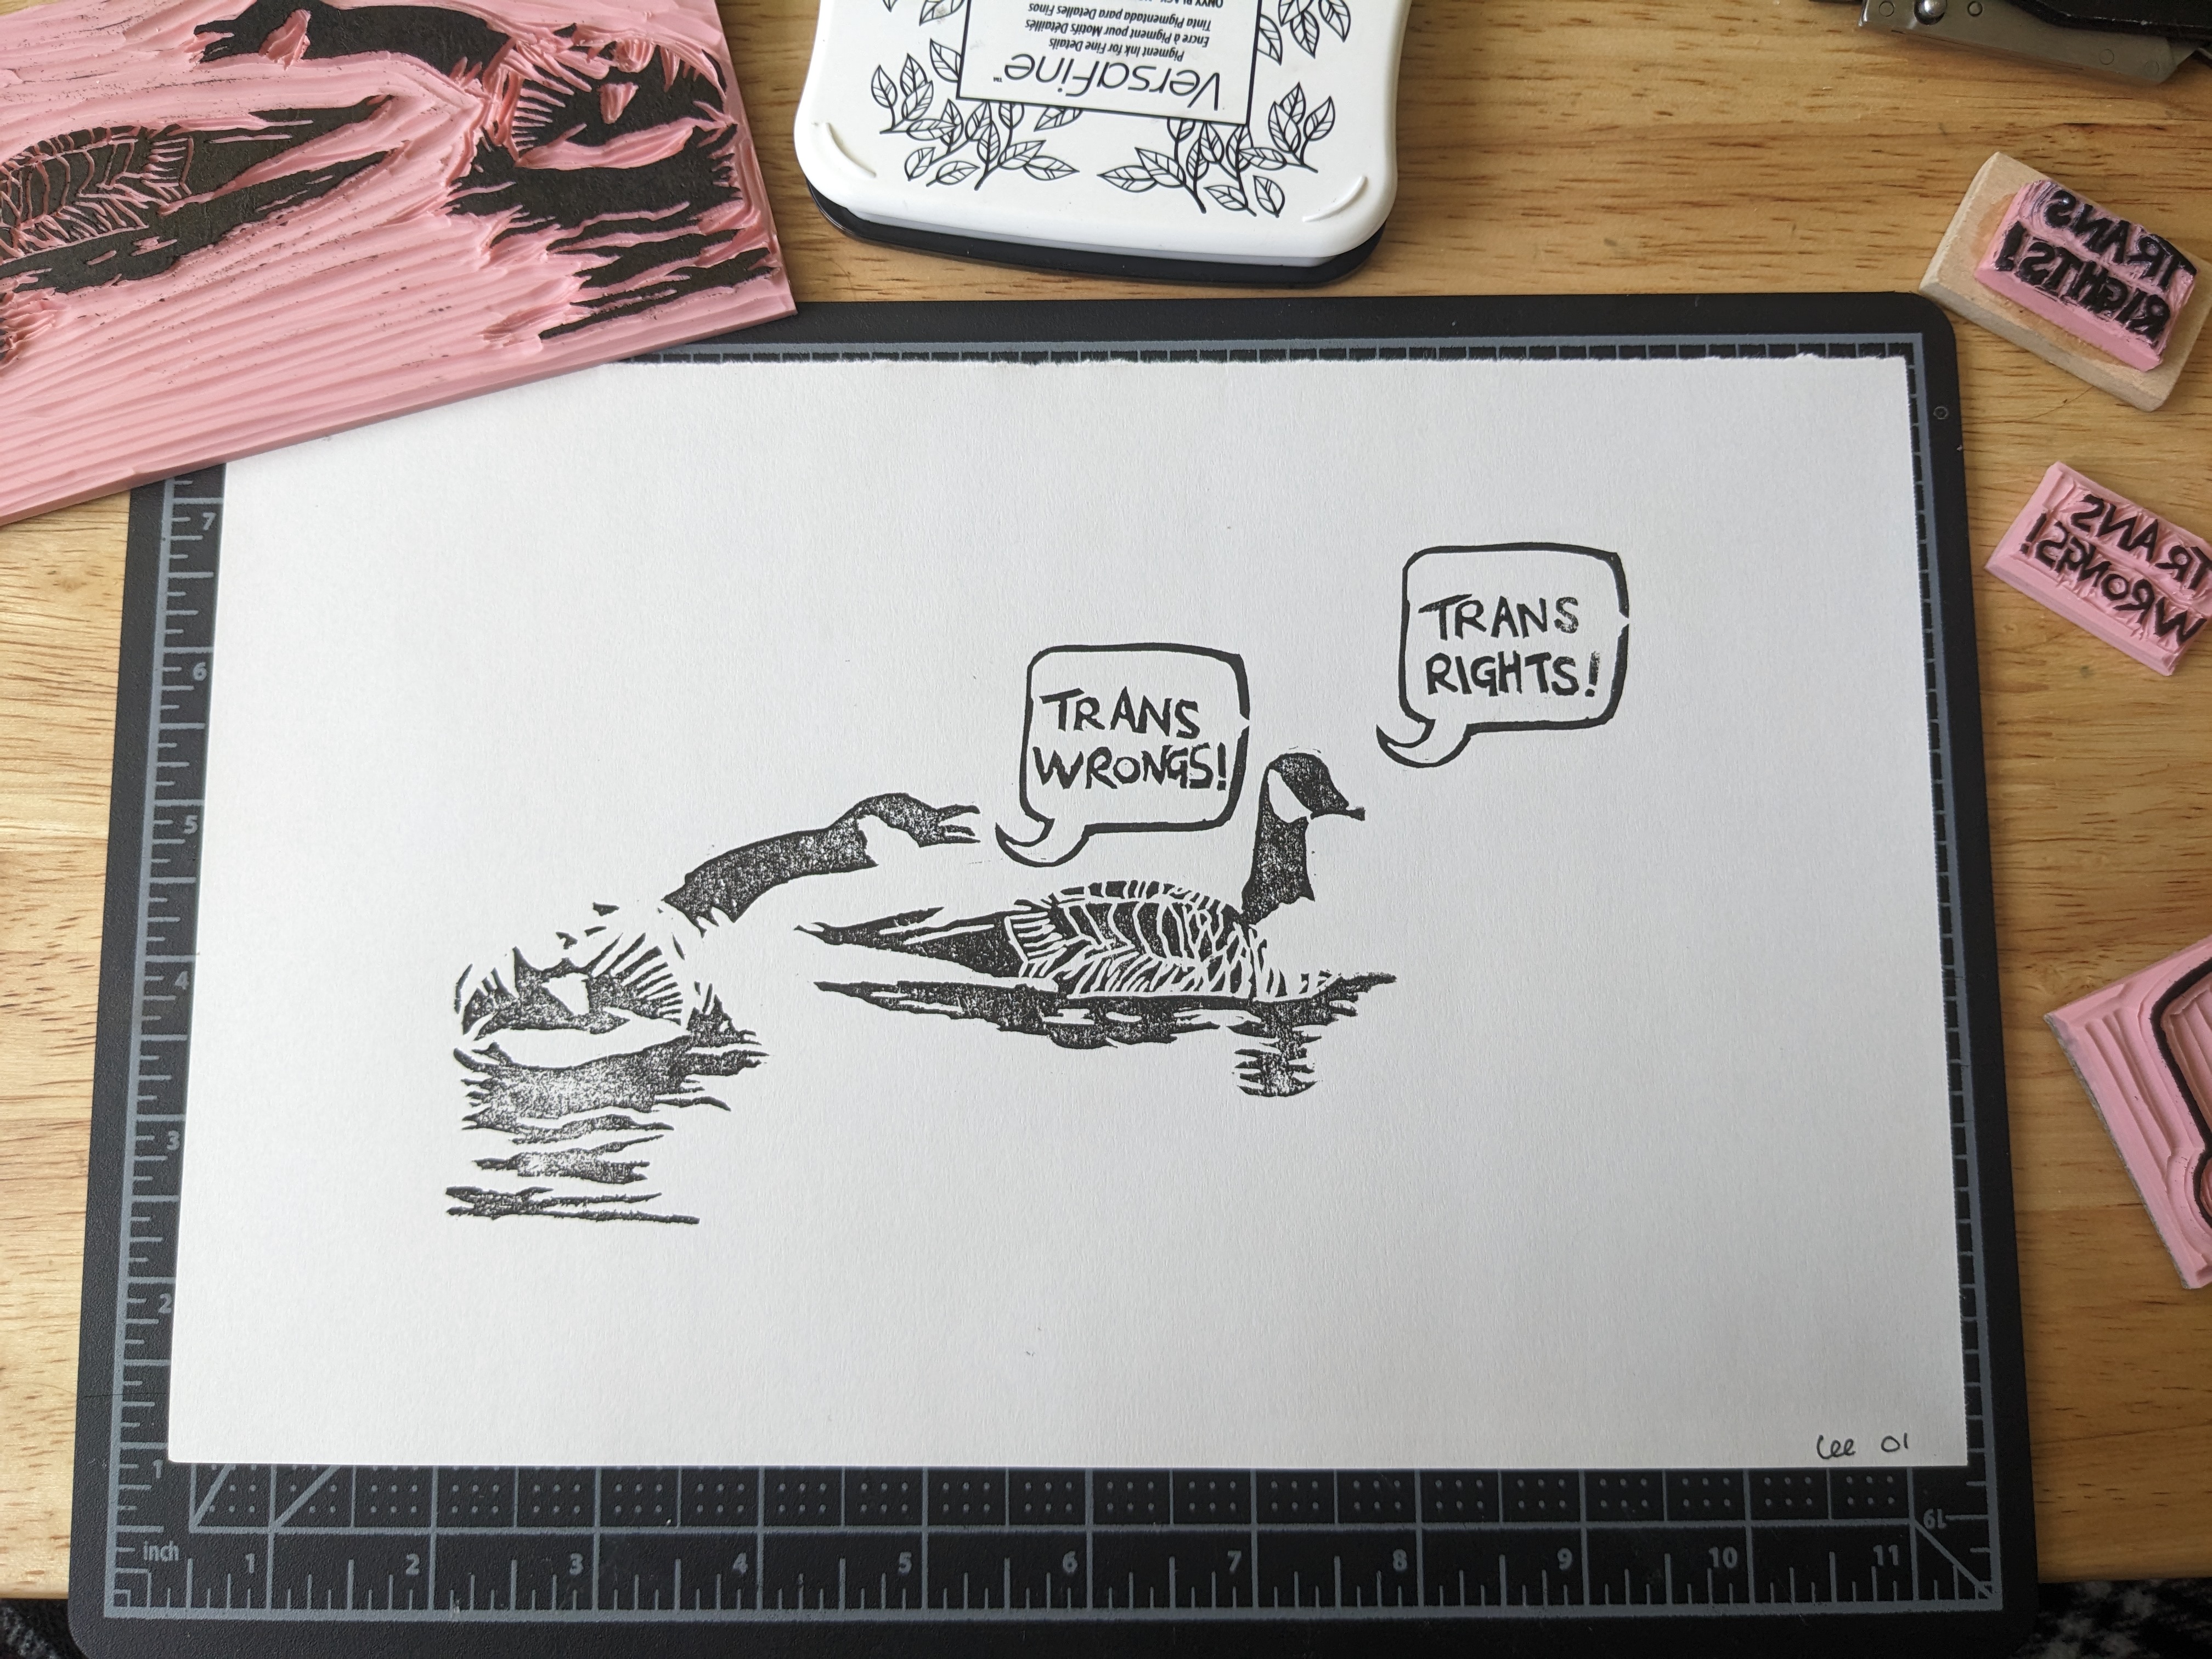 Two Canada geese and their reflections in the water. One is calmly swimming away, while the over leans over towards them and HONKS! Both have speech bubbles; the calm goose says 'trans rights!' while the honking goose says 'trans wrongs!'